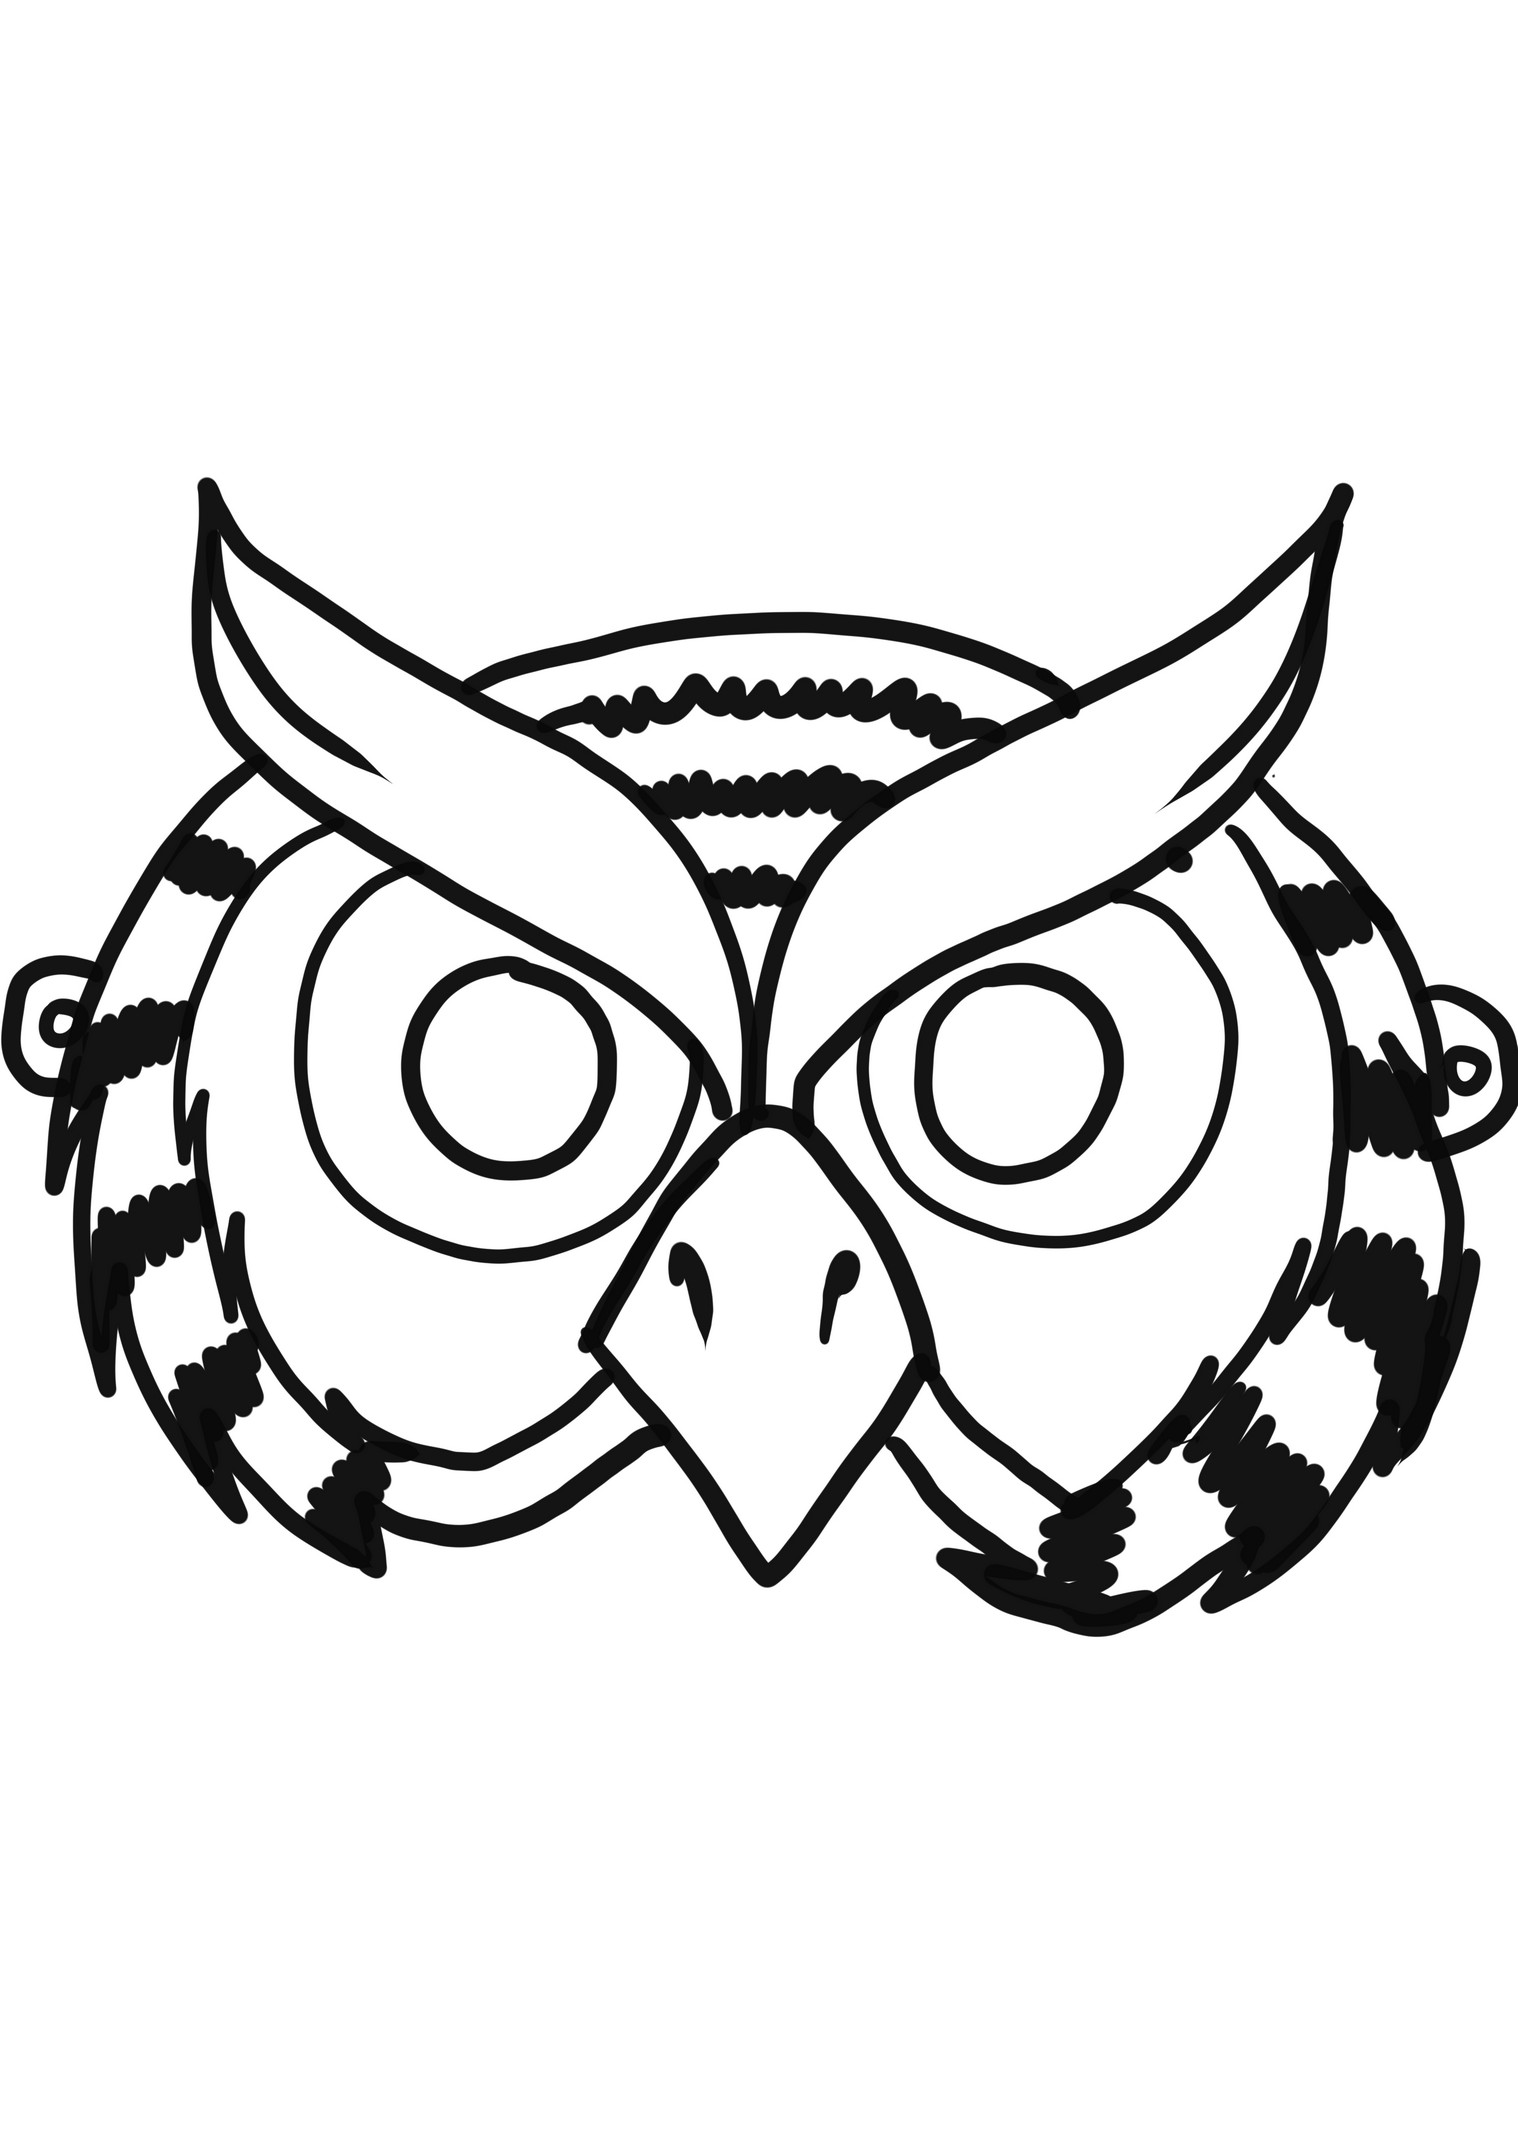 Owl Mask coloring page to cut out